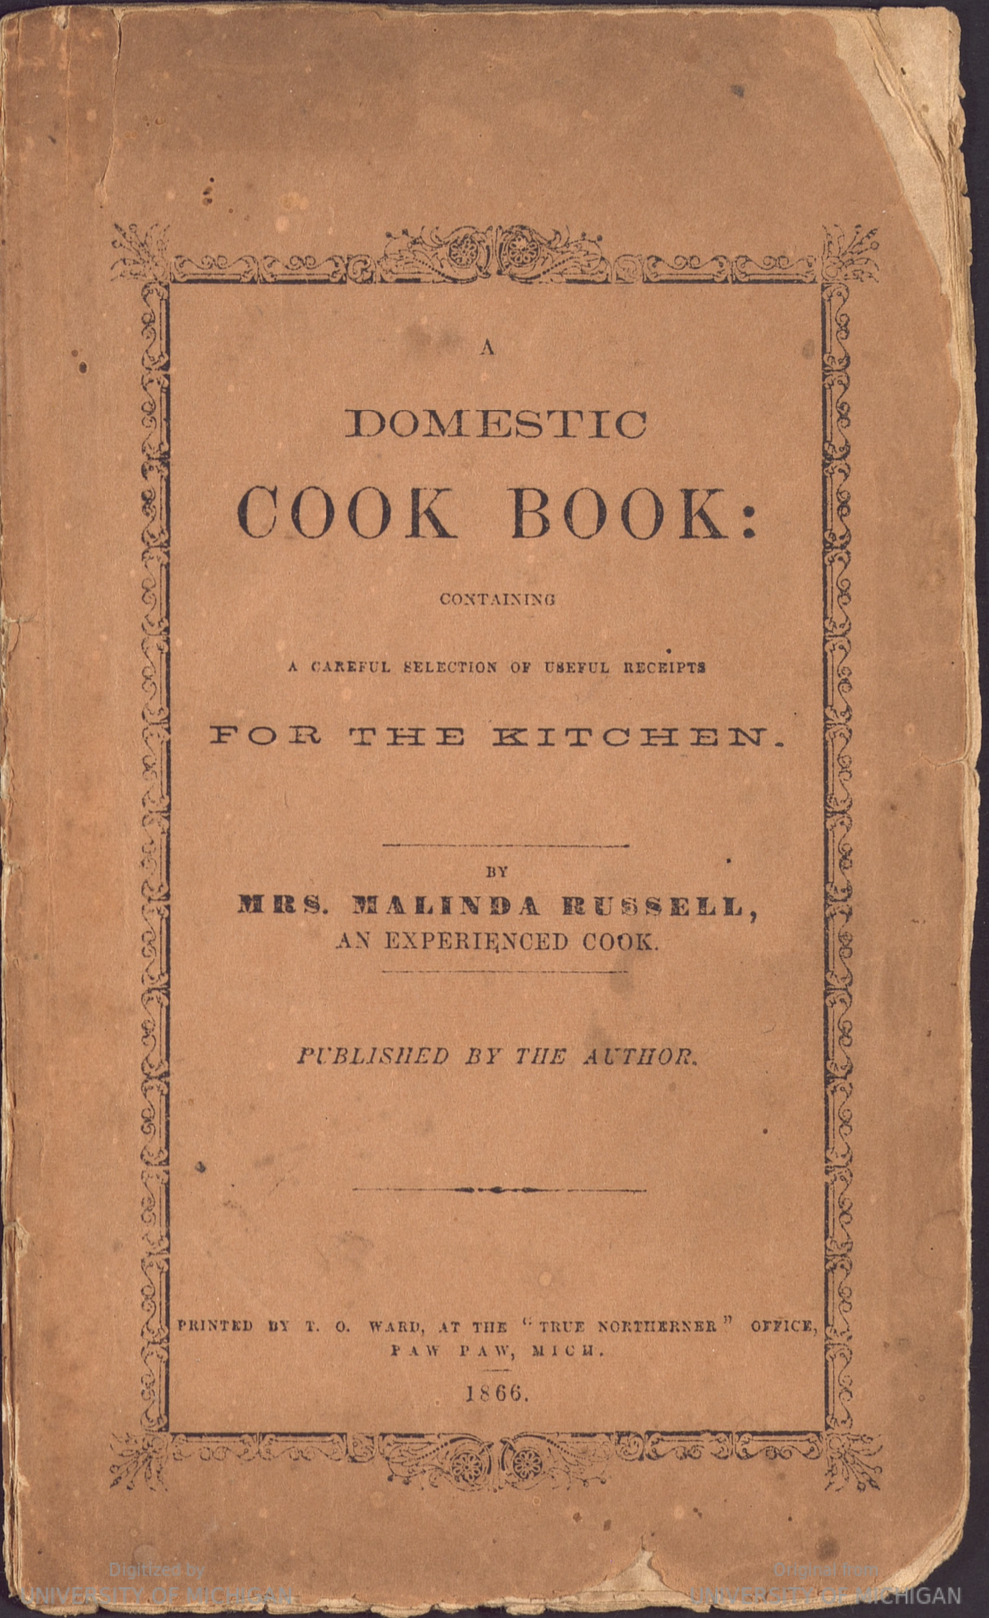 Malinda Russell's cookbook, a tattered but in tact relic